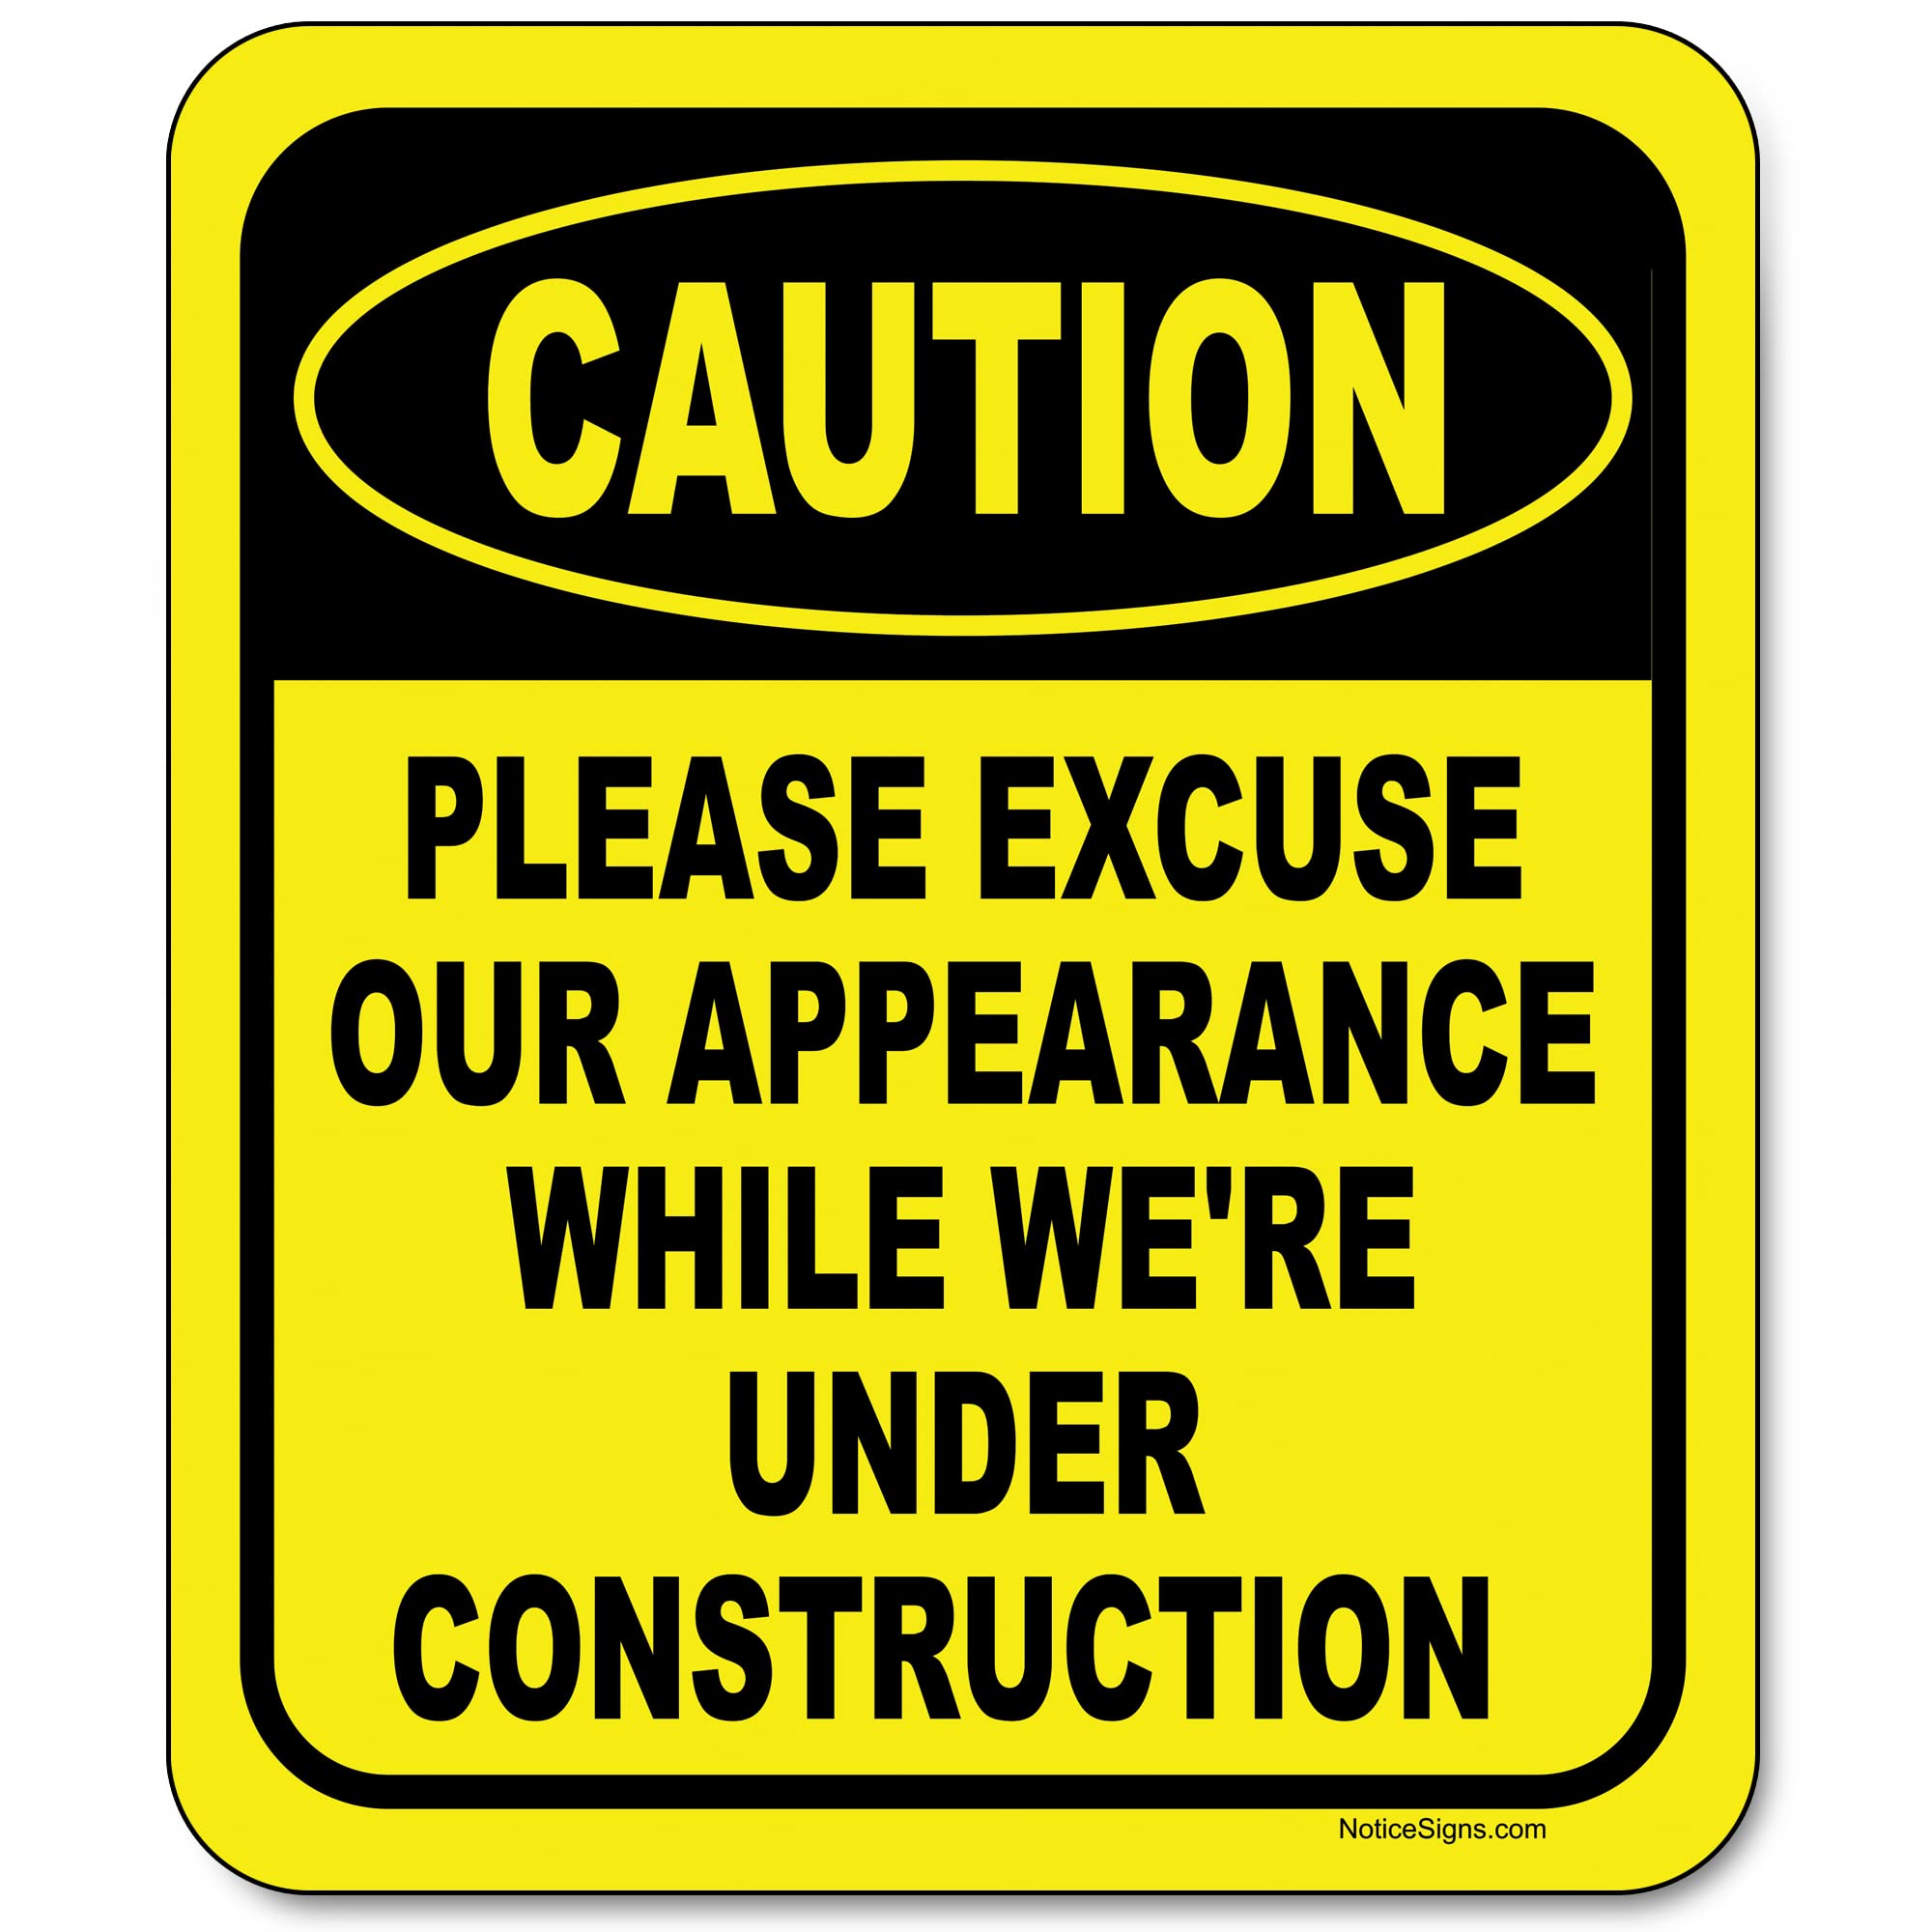 Please excuse our mess - we are under construction